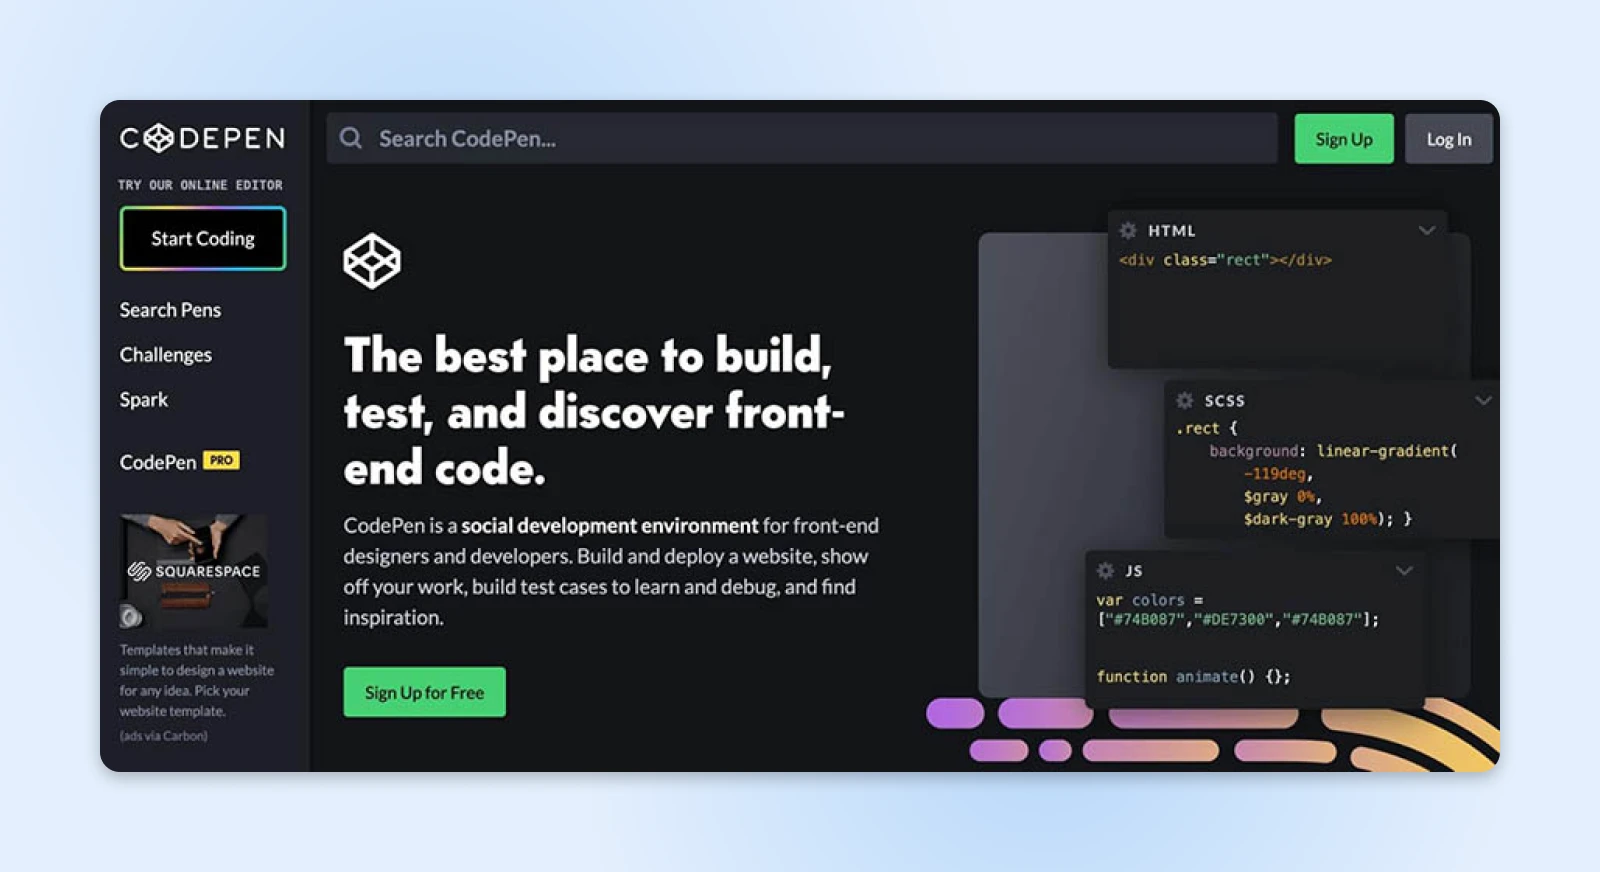 The CodePen homepage features a green signup button to learn front-end code for free